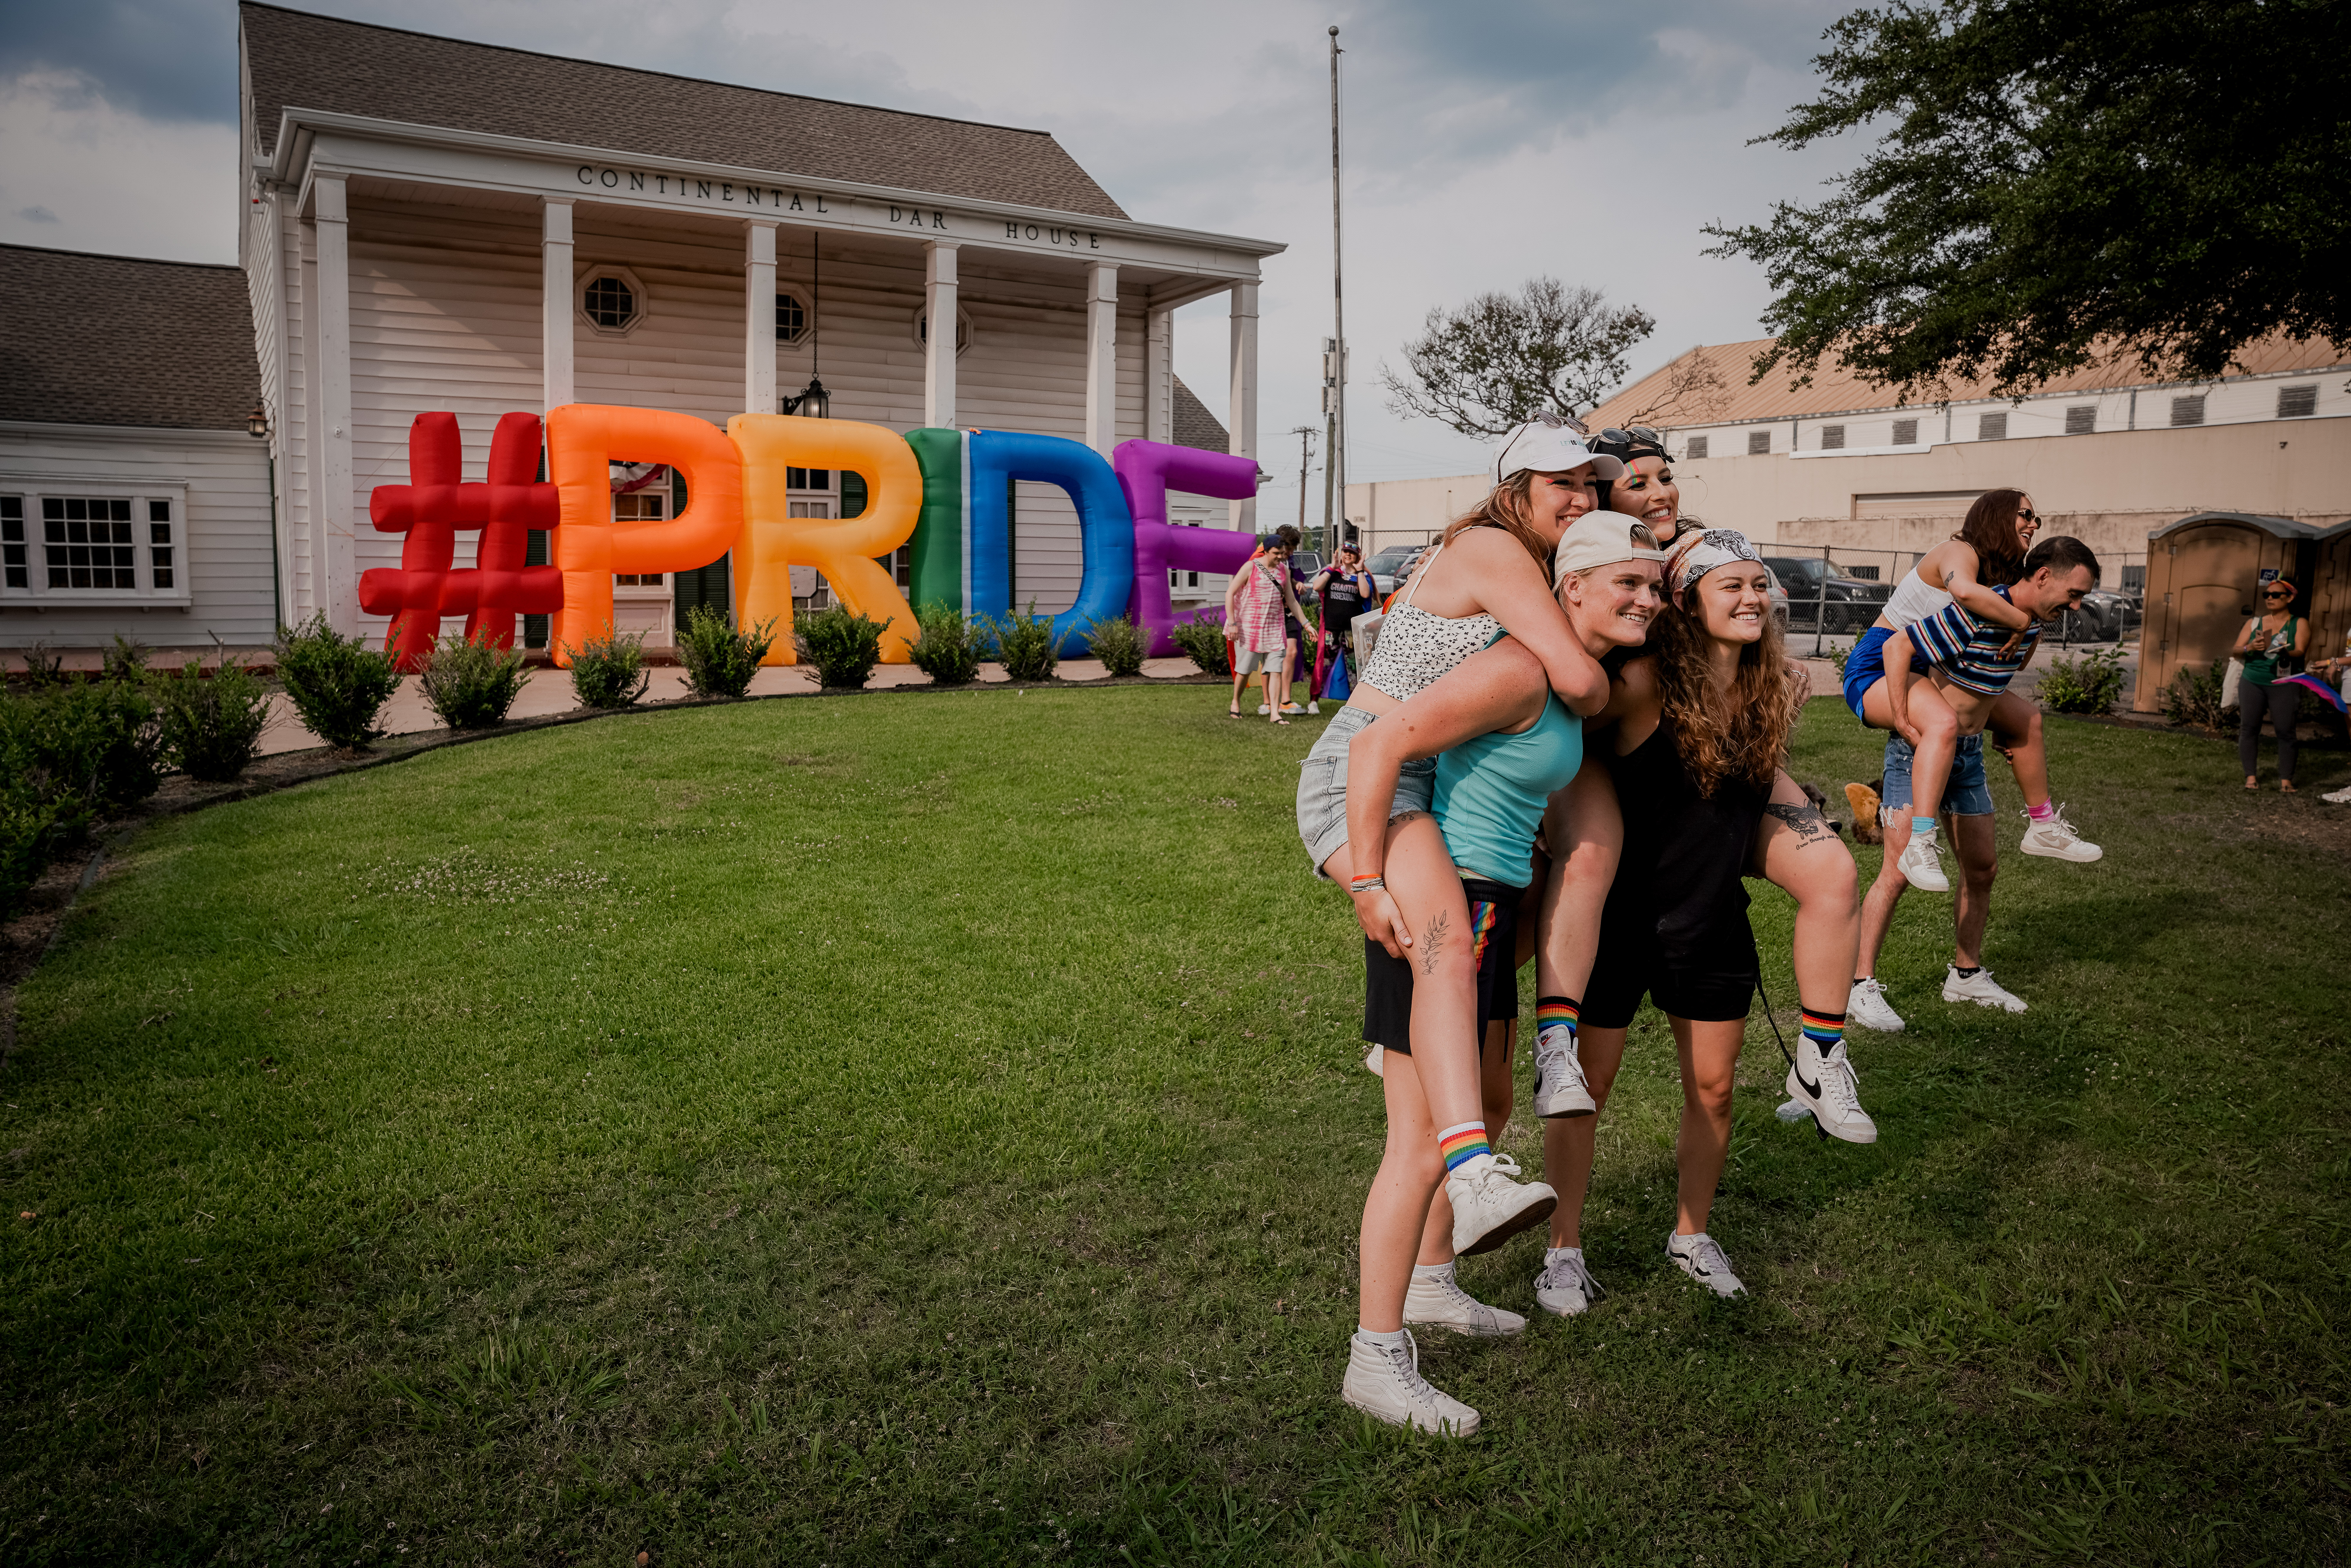 People riding piggyback for a group photo in front of a rainbow -colored inflatable that says "PRIDE"